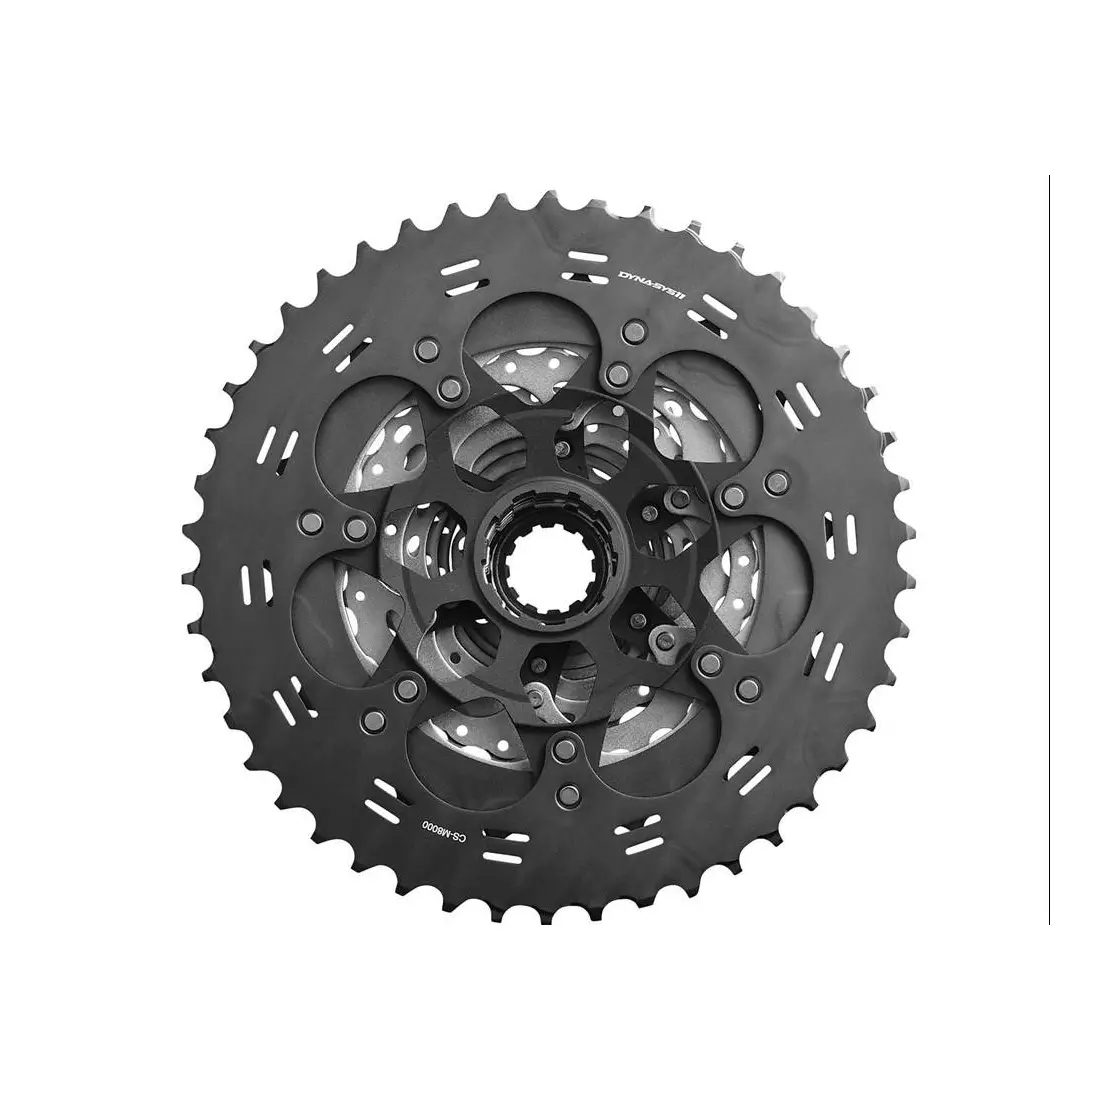 SHIMANO CS-M8000 bicycle cassette 11-speed, 11-40T